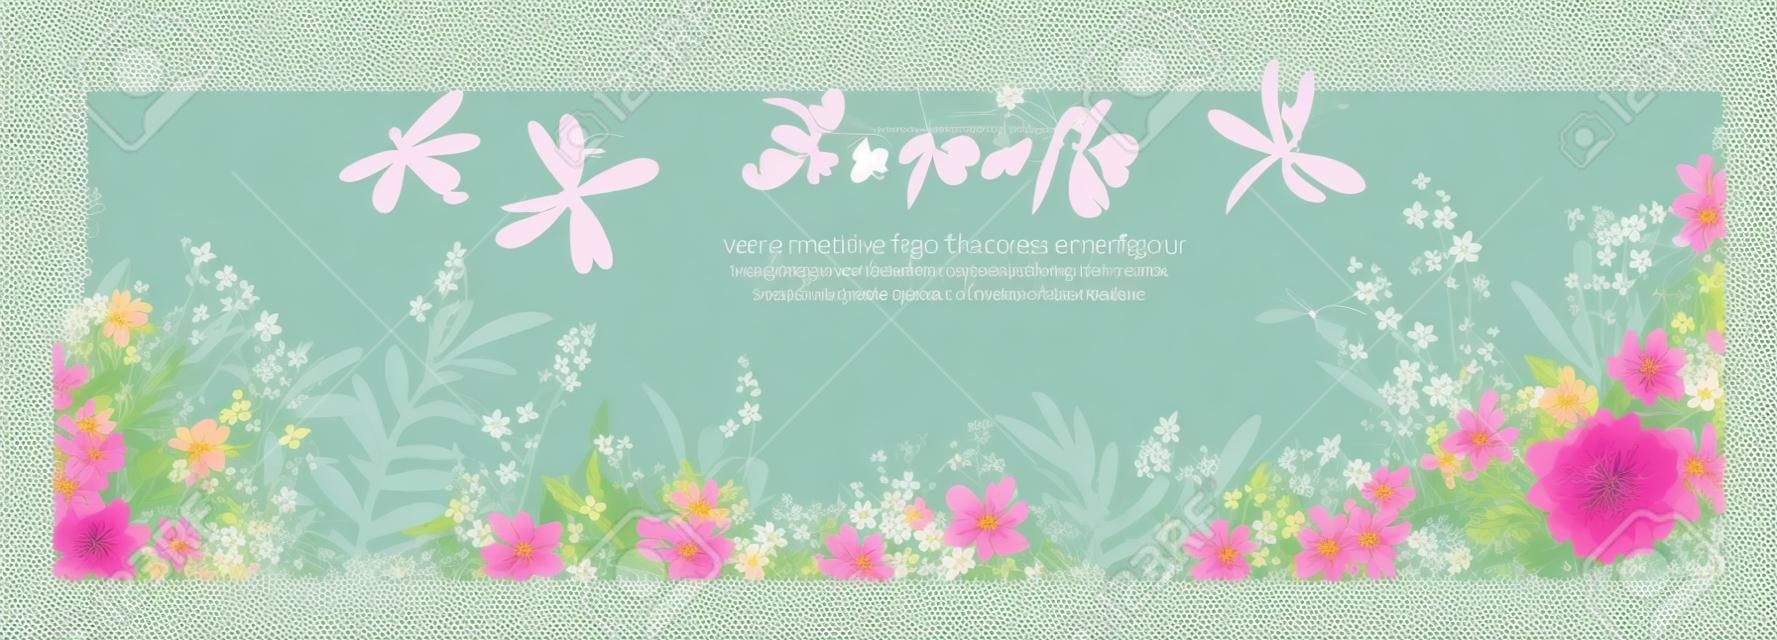 Vector vertical border with dragonflies, flowers, grass and plants. Summer style. Floral background.